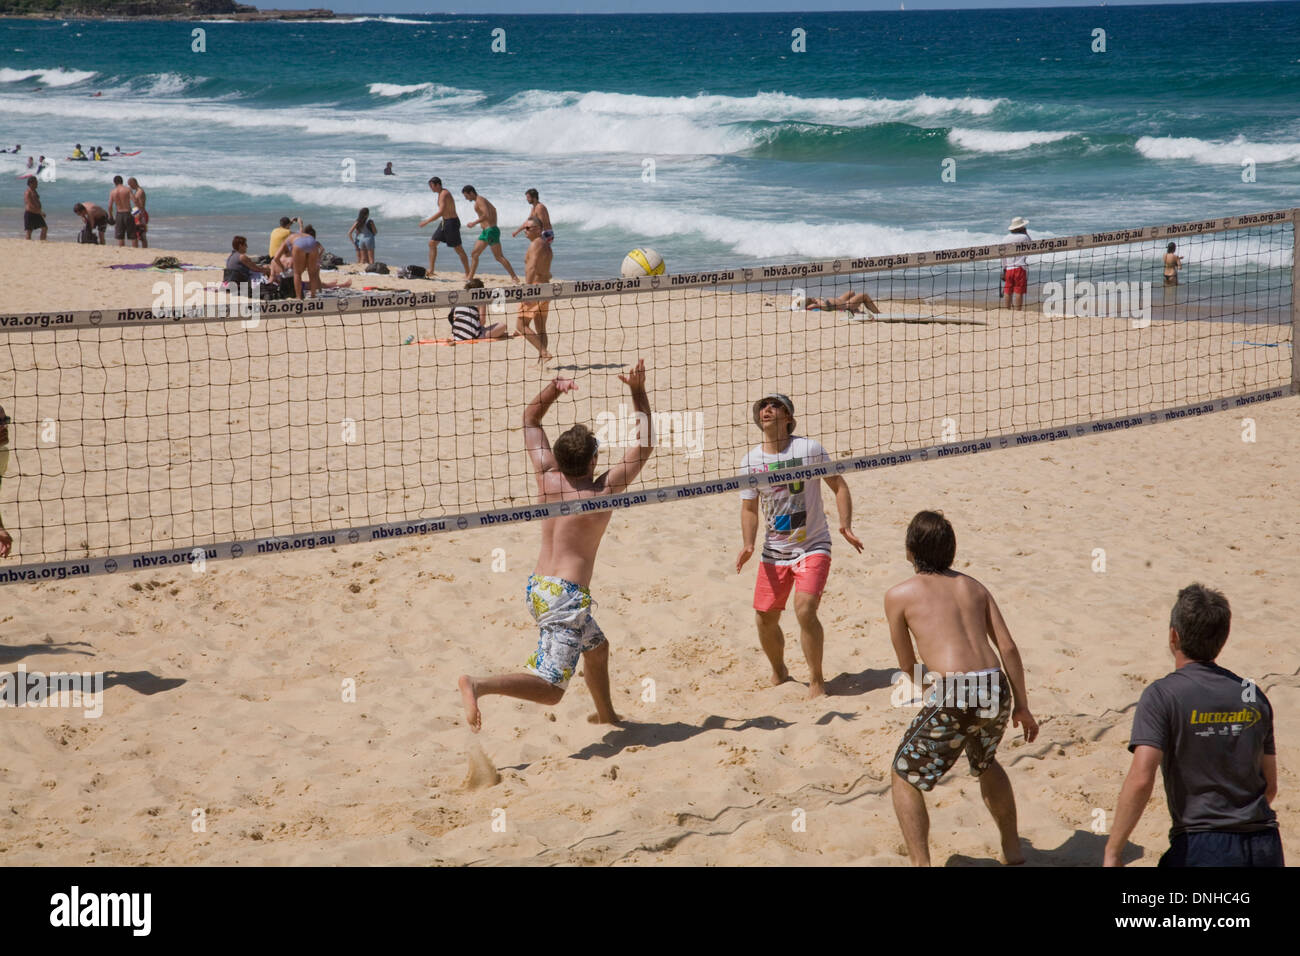 Young boys playing beach volleyball on Manly beach in Sydney,Australia Stock Photo